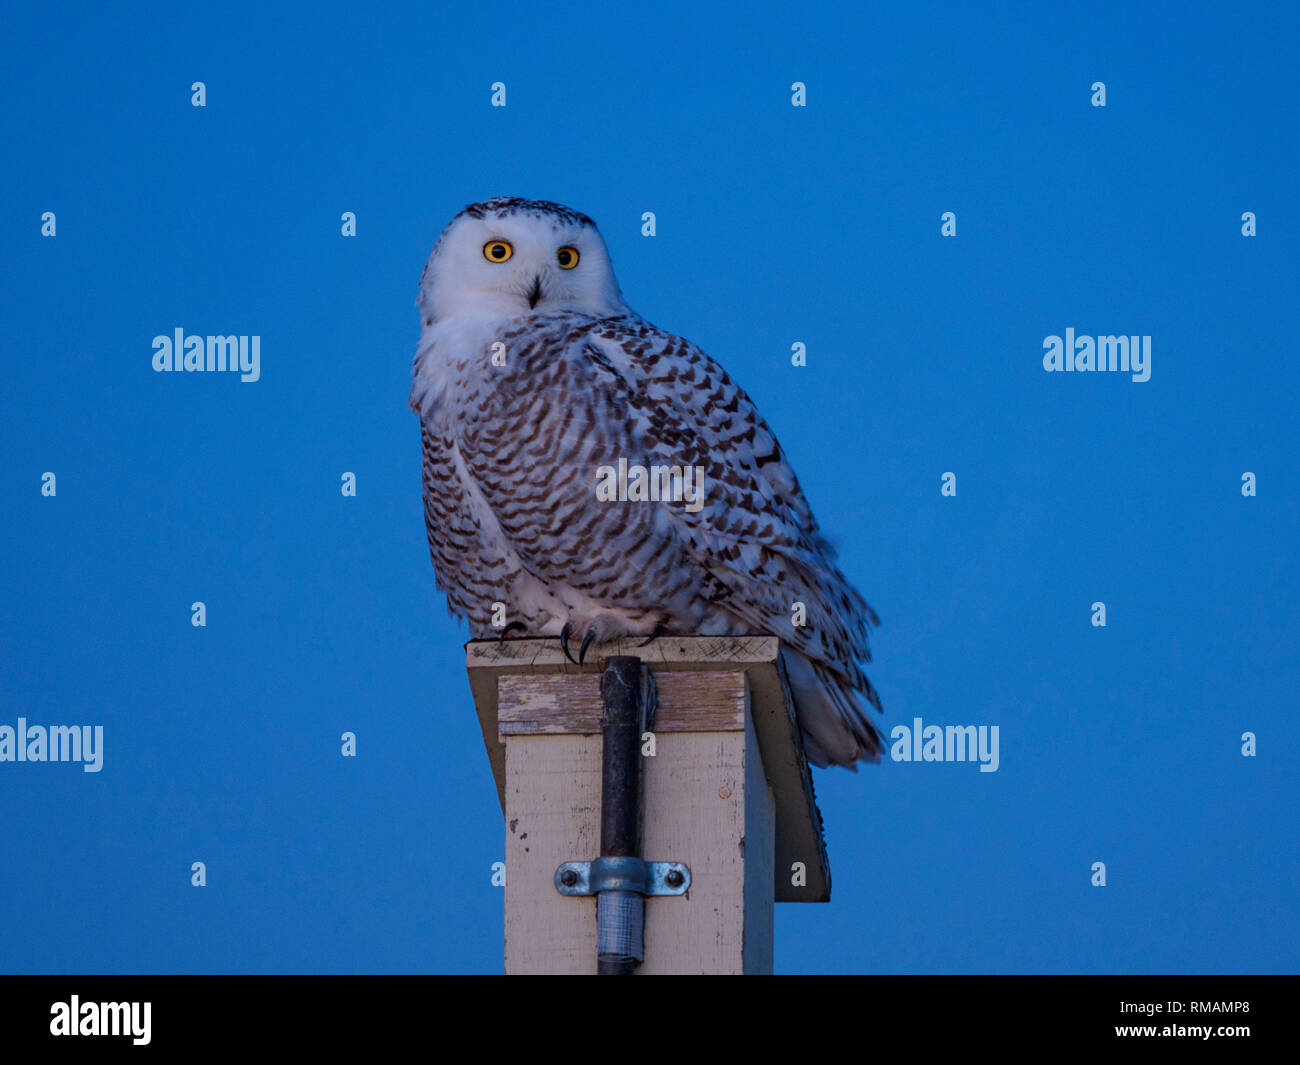 Female snow owl in the evening, Amherst Island, Ontario Stock Photo